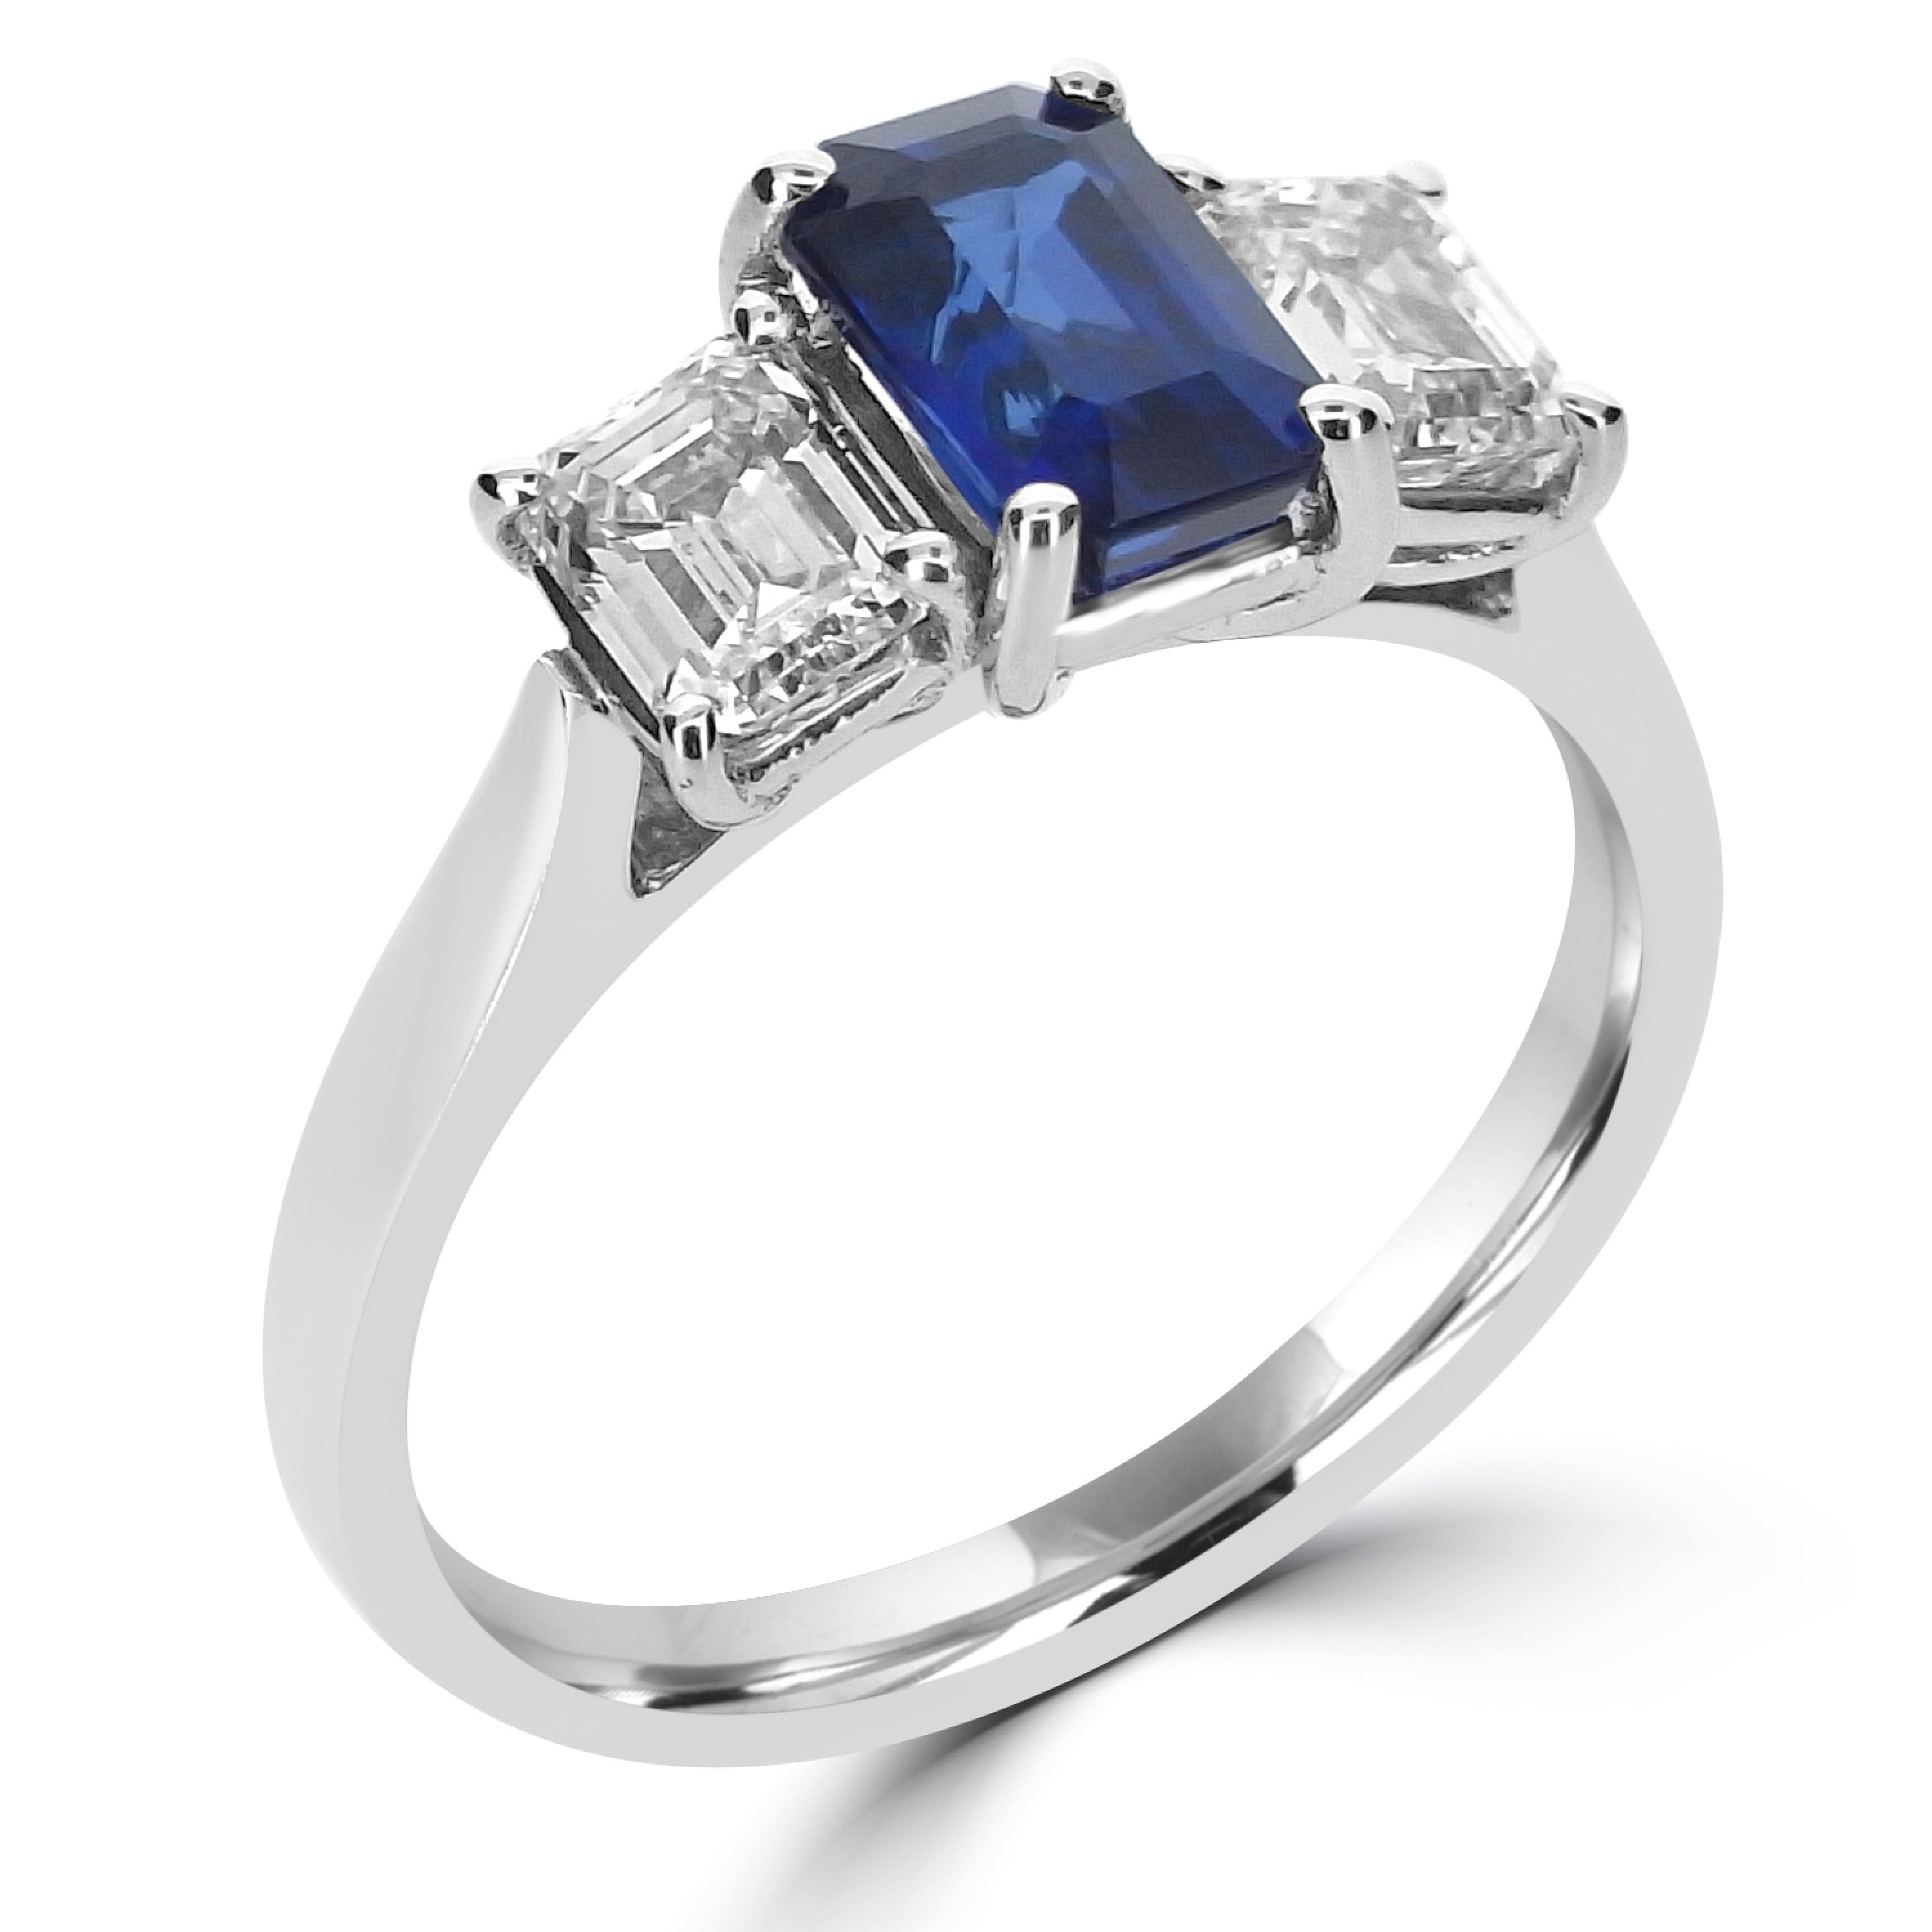 SAPPHIRE AND DIAMOND TRILOGY ENGAGEMENT RING